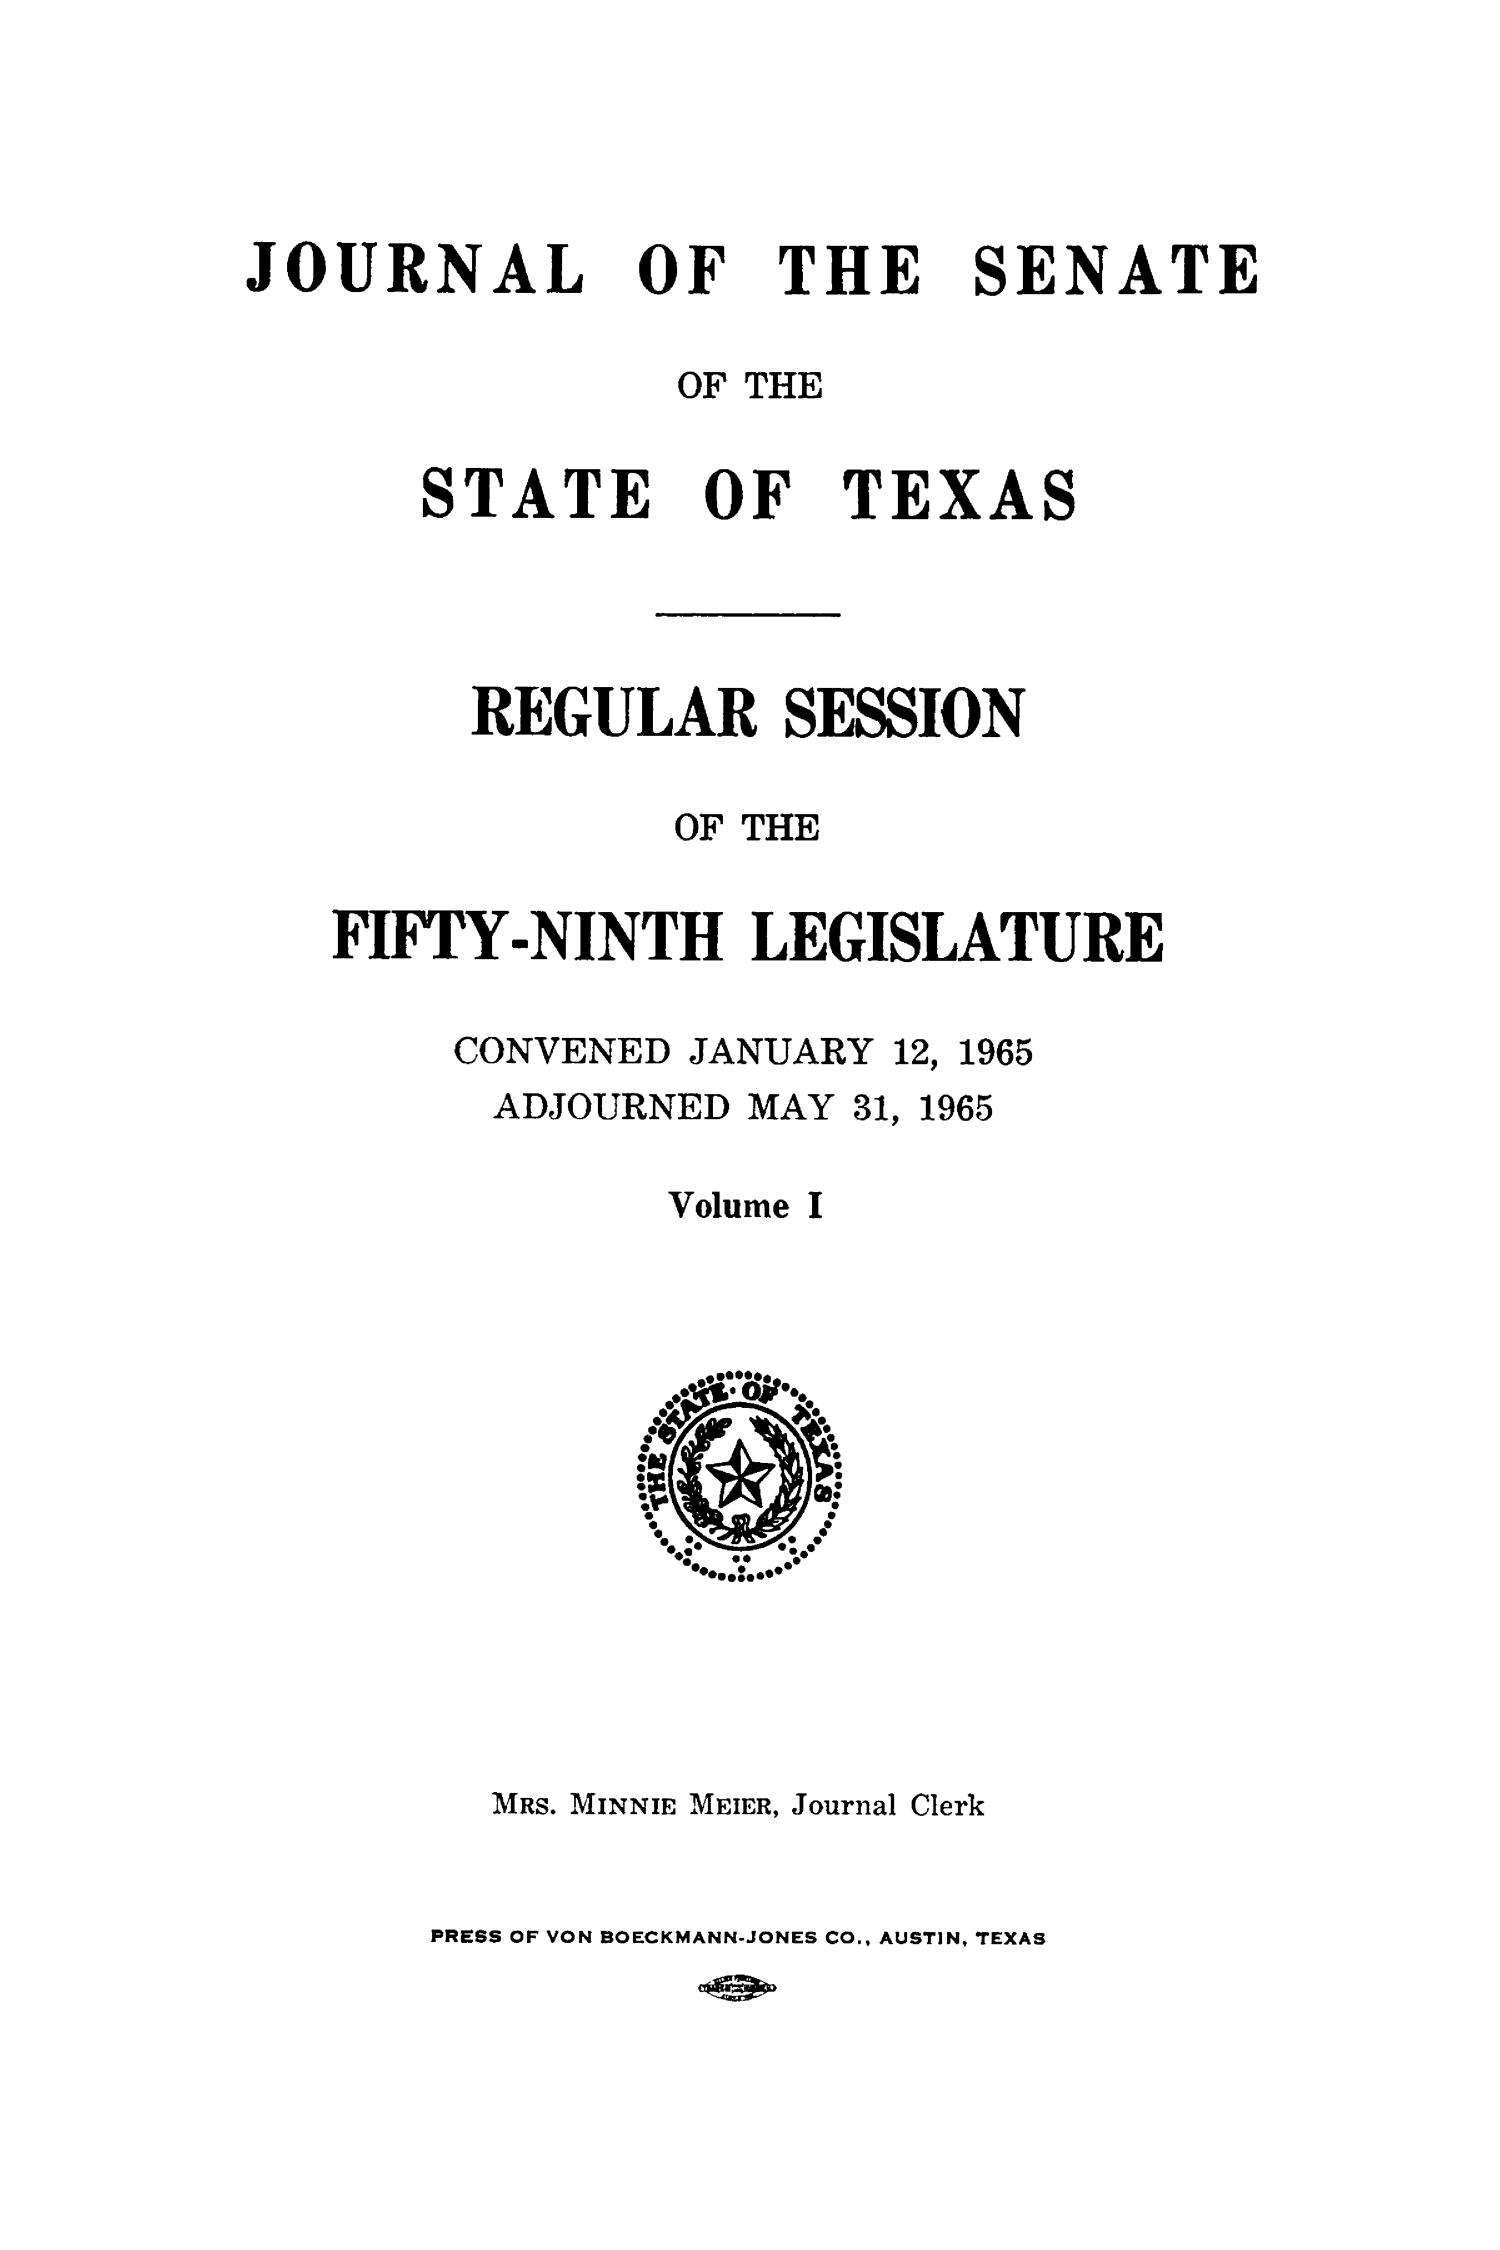 Journal of the Senate of the State of Texas, Regular Session of the Fifty-Ninth Legislature, Volume 1
                                                
                                                    Title Page
                                                